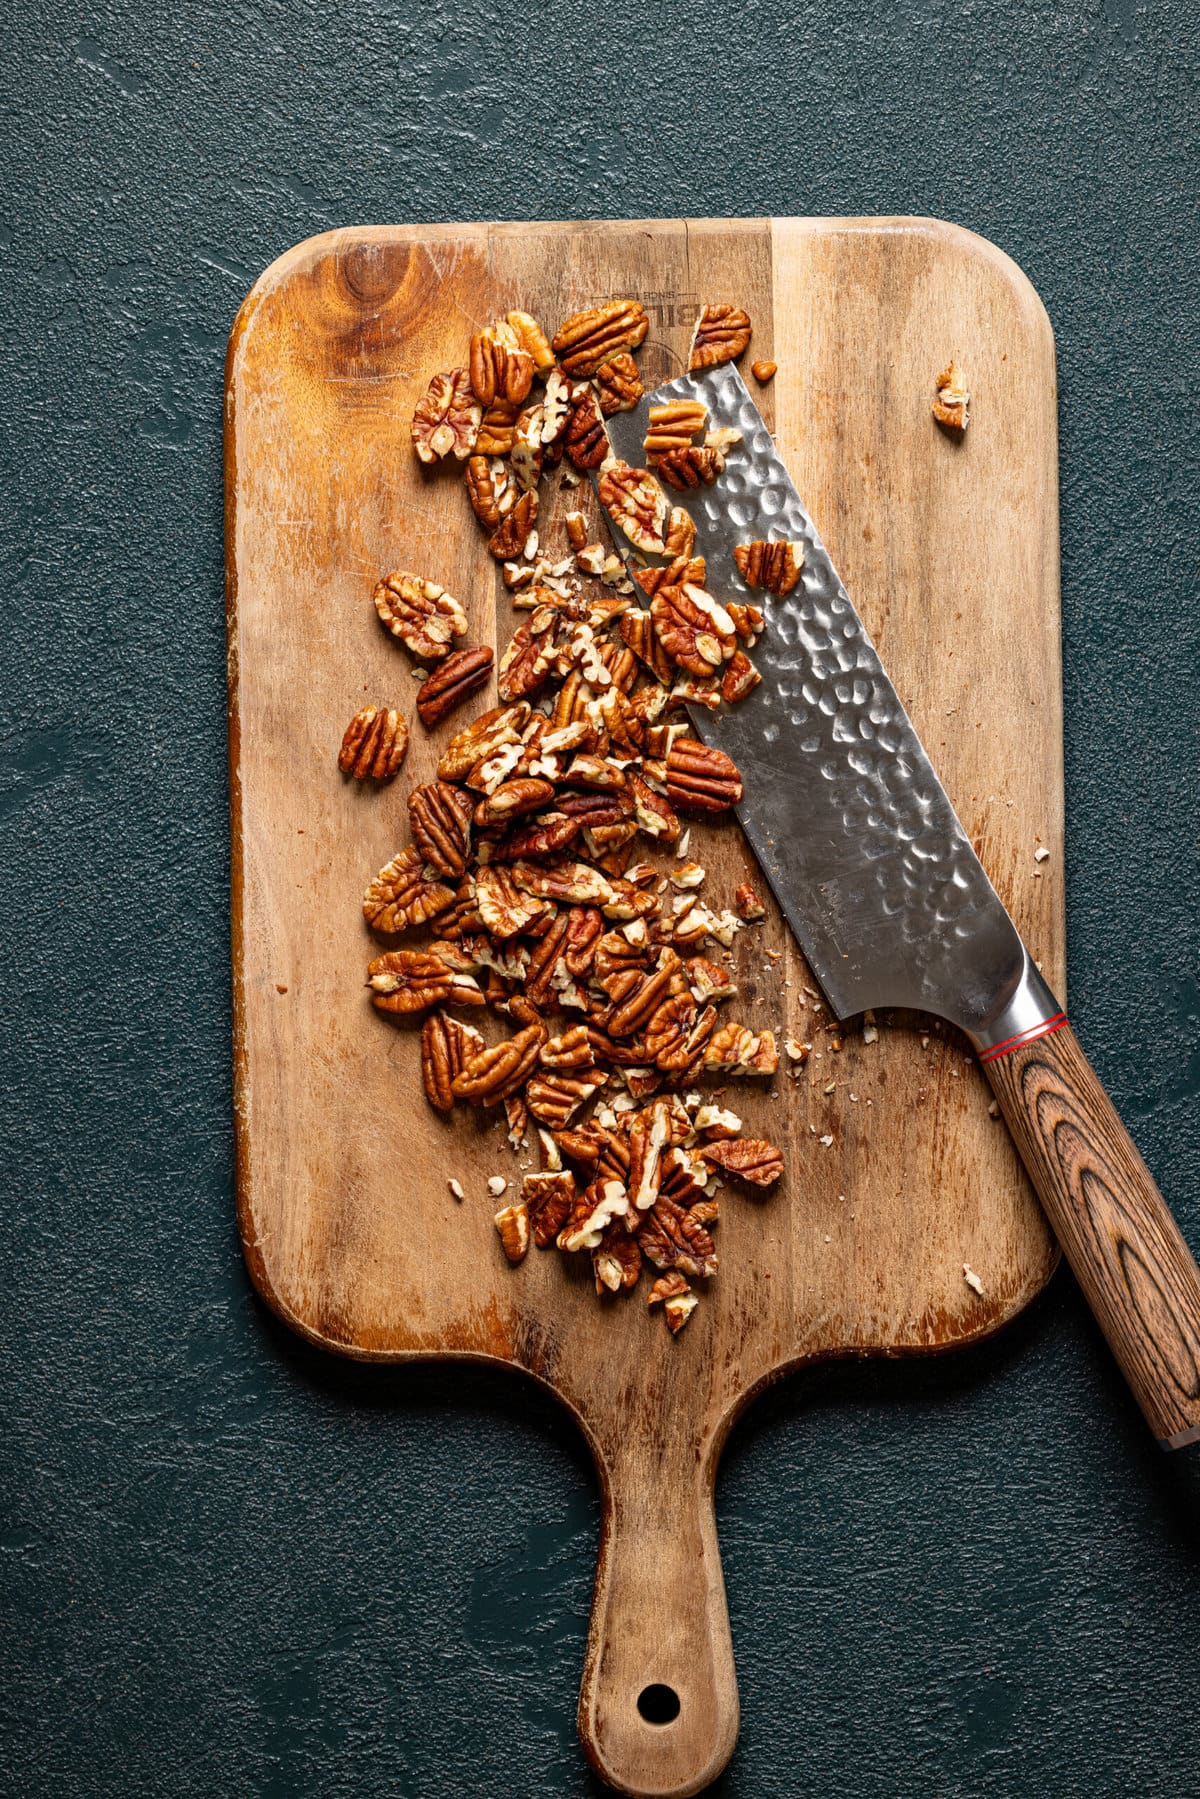 Chopped pecans on a cutting board with a knife.